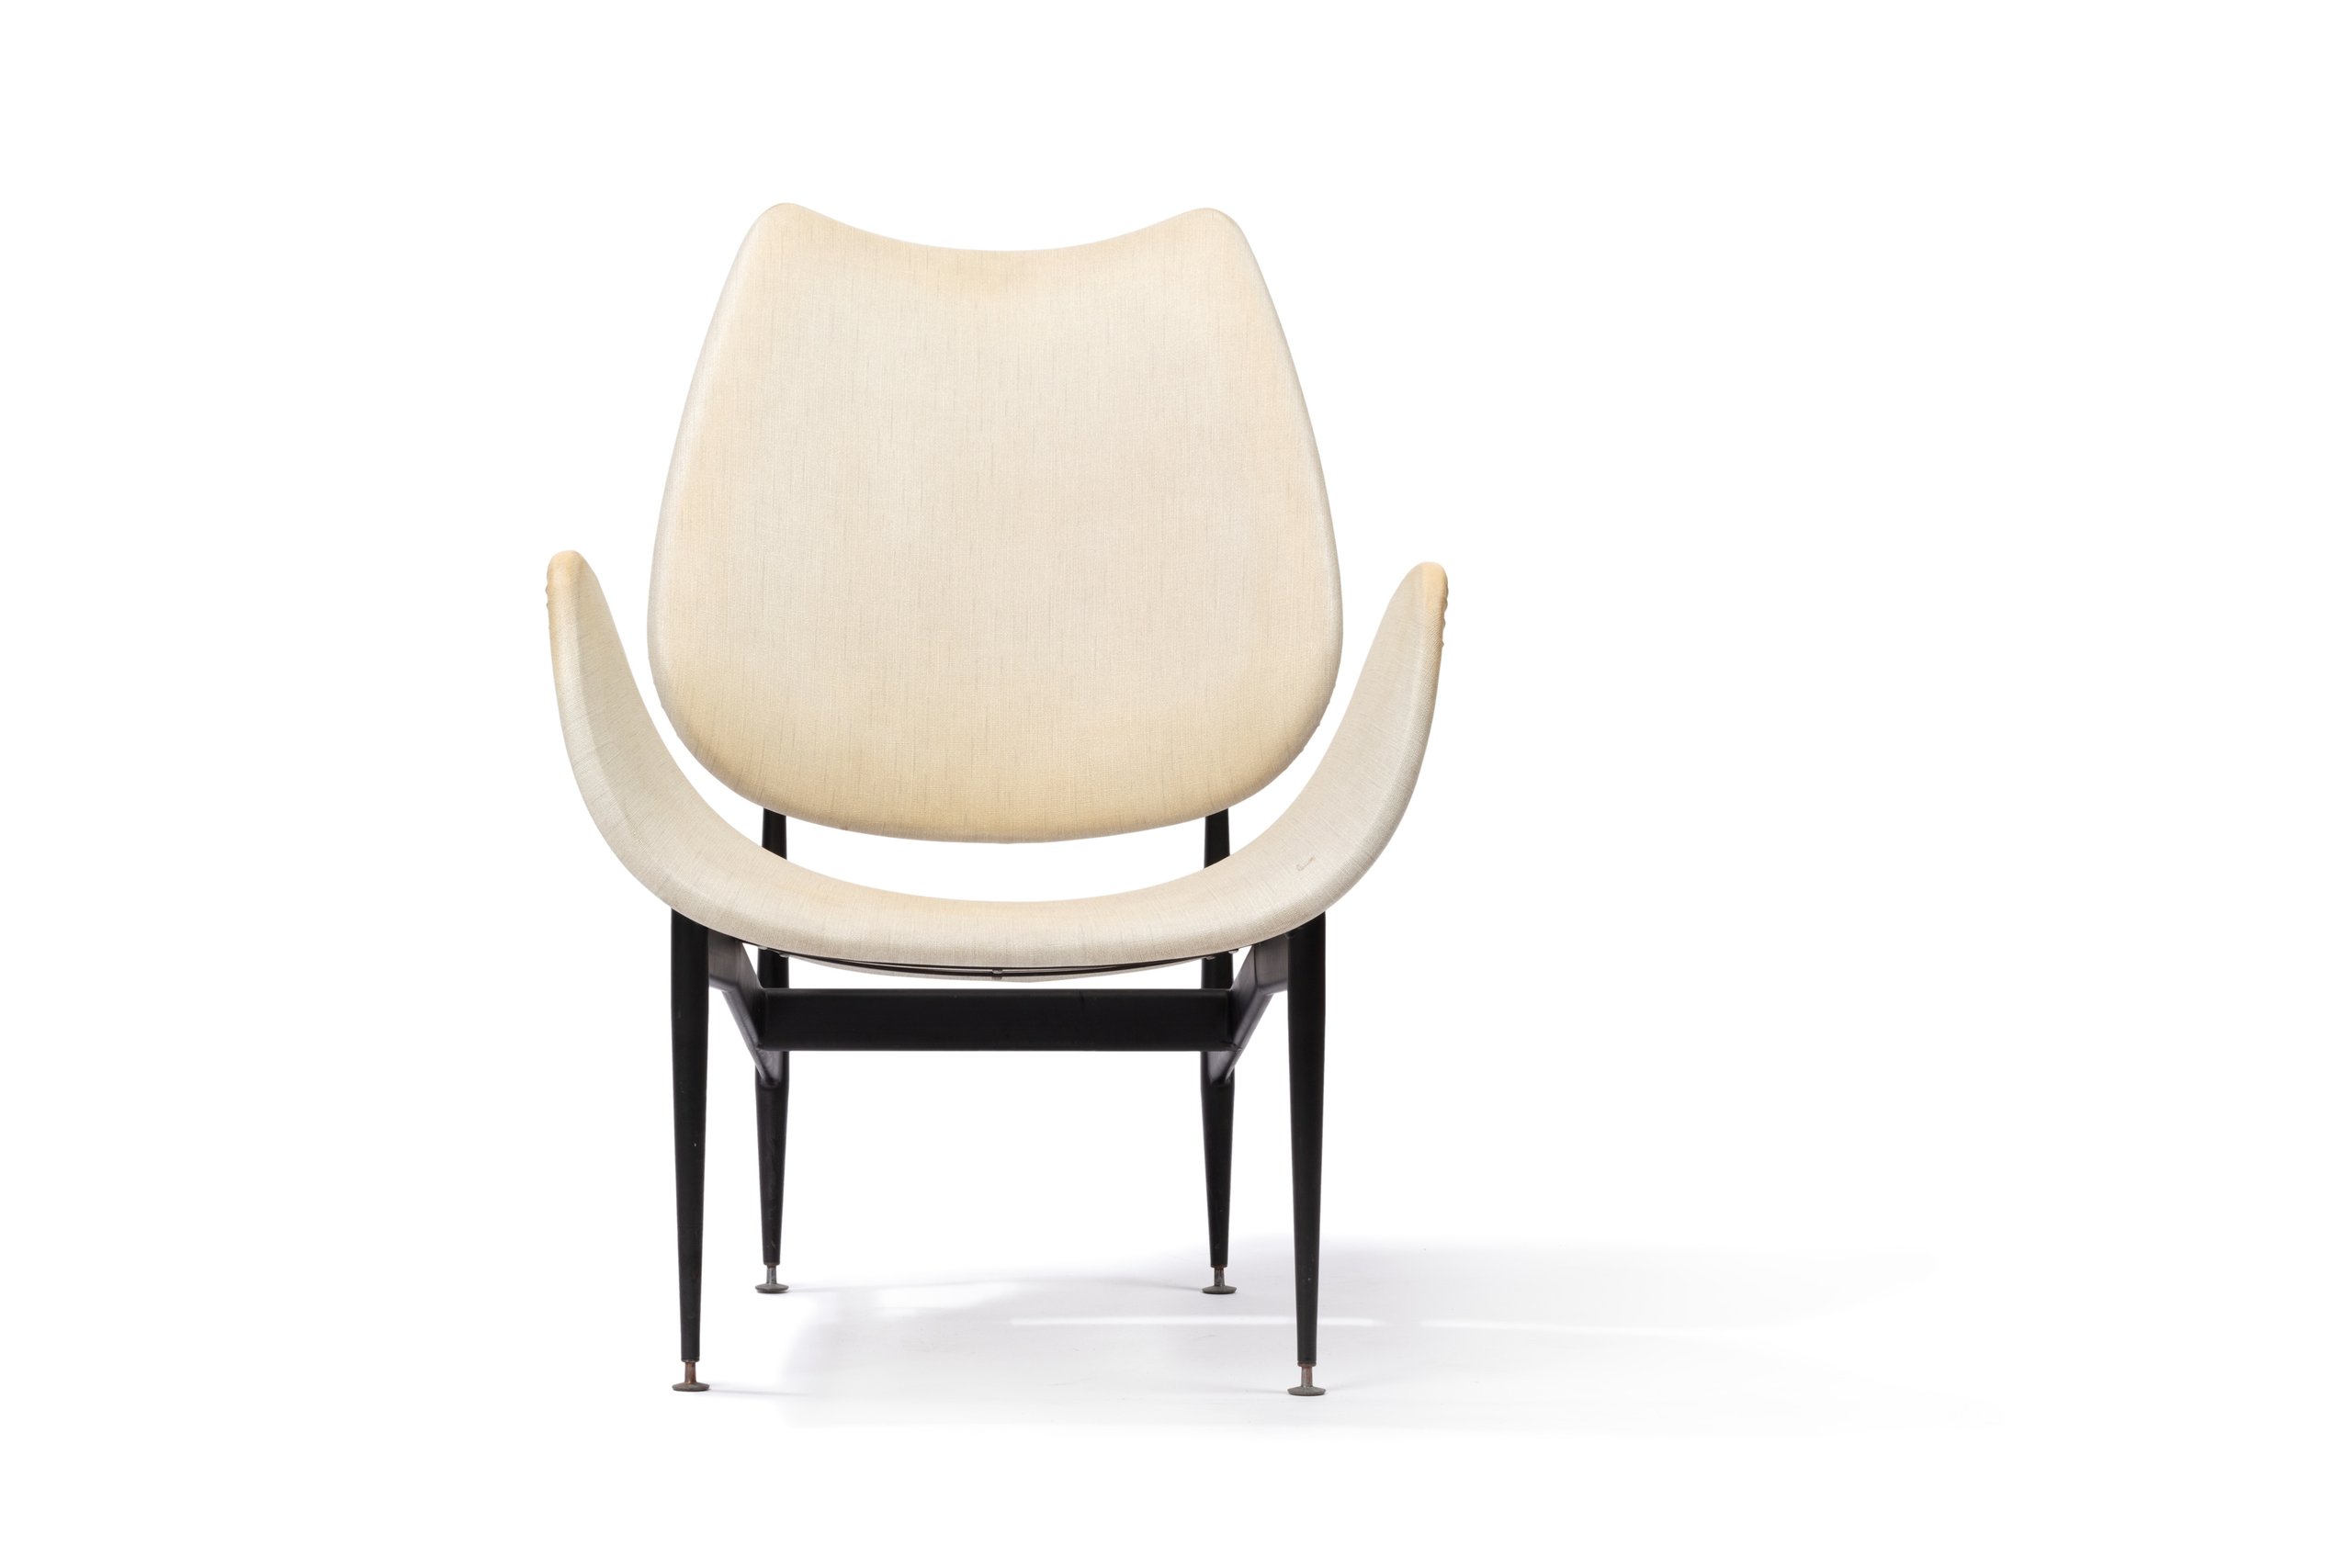 'Scape' armchair designed by Grant Featherston